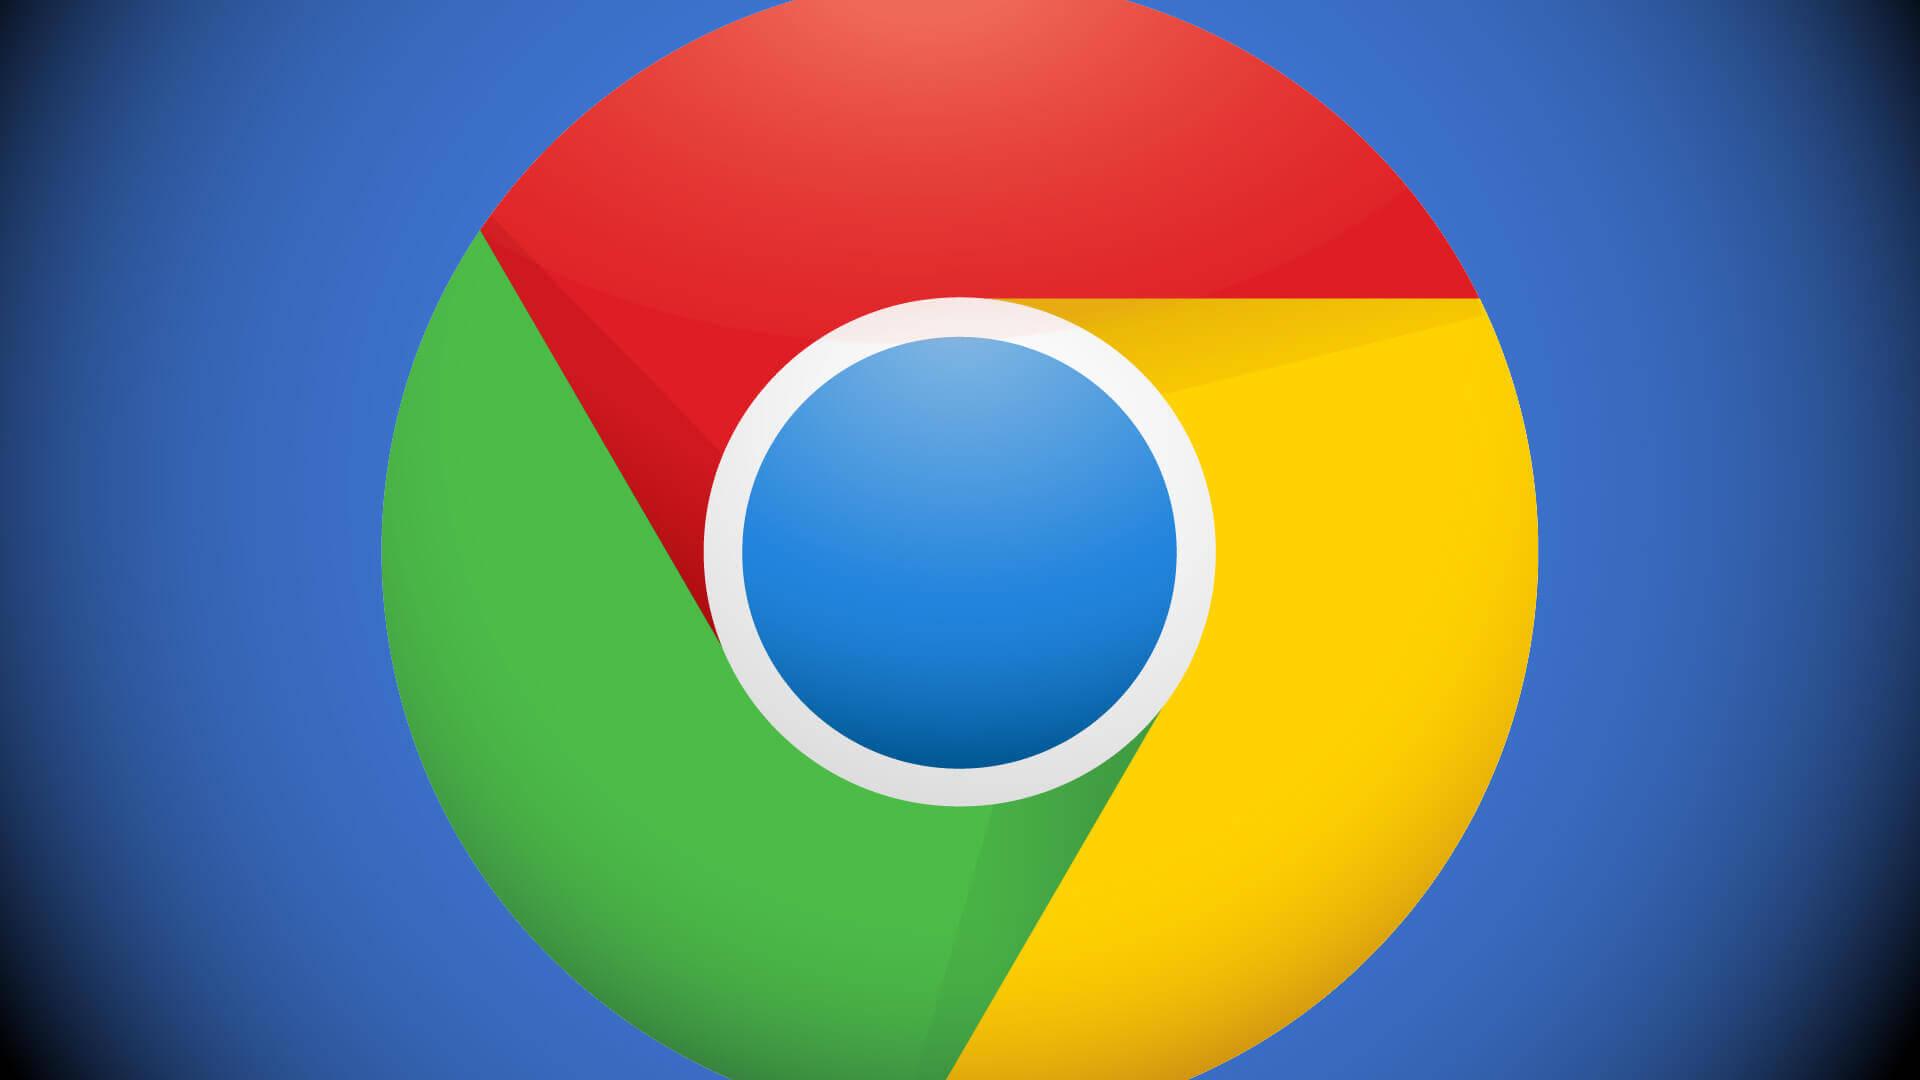 Google Chrome Browser Logo - Google now allows its Chrome browser to remove all ads from 'abusive ...